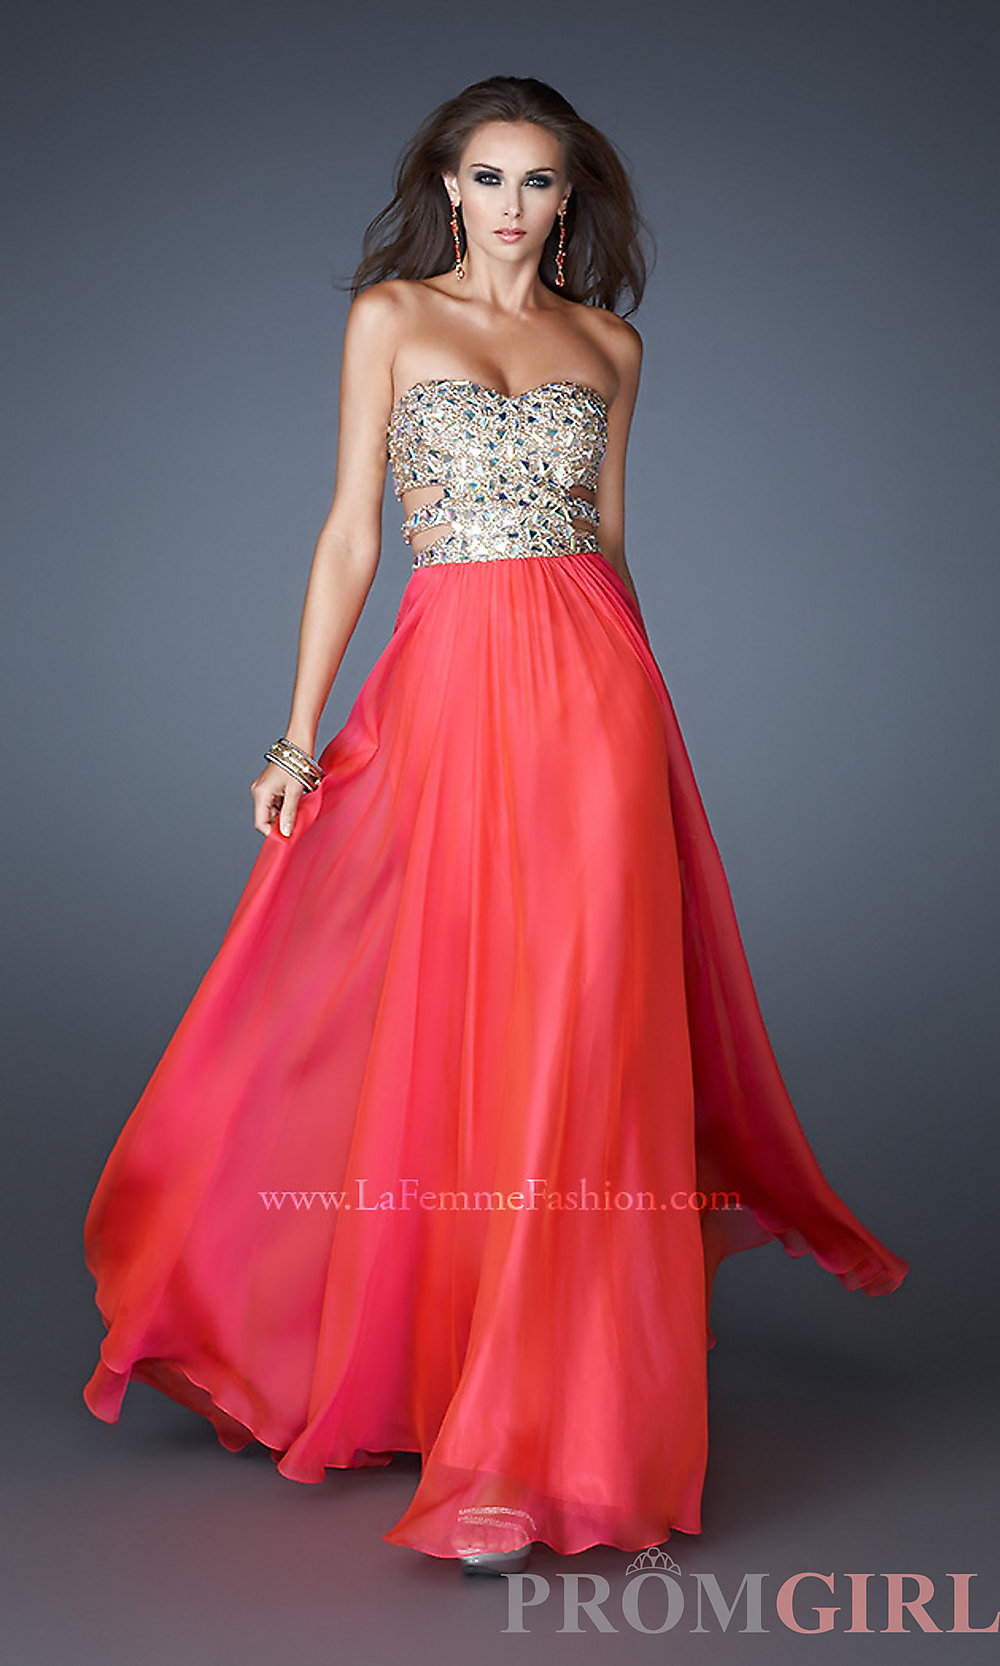 Latest Fancy Gowns, Prom and Cocktail dresses for Weddings and Parties 2014-2015 (17)